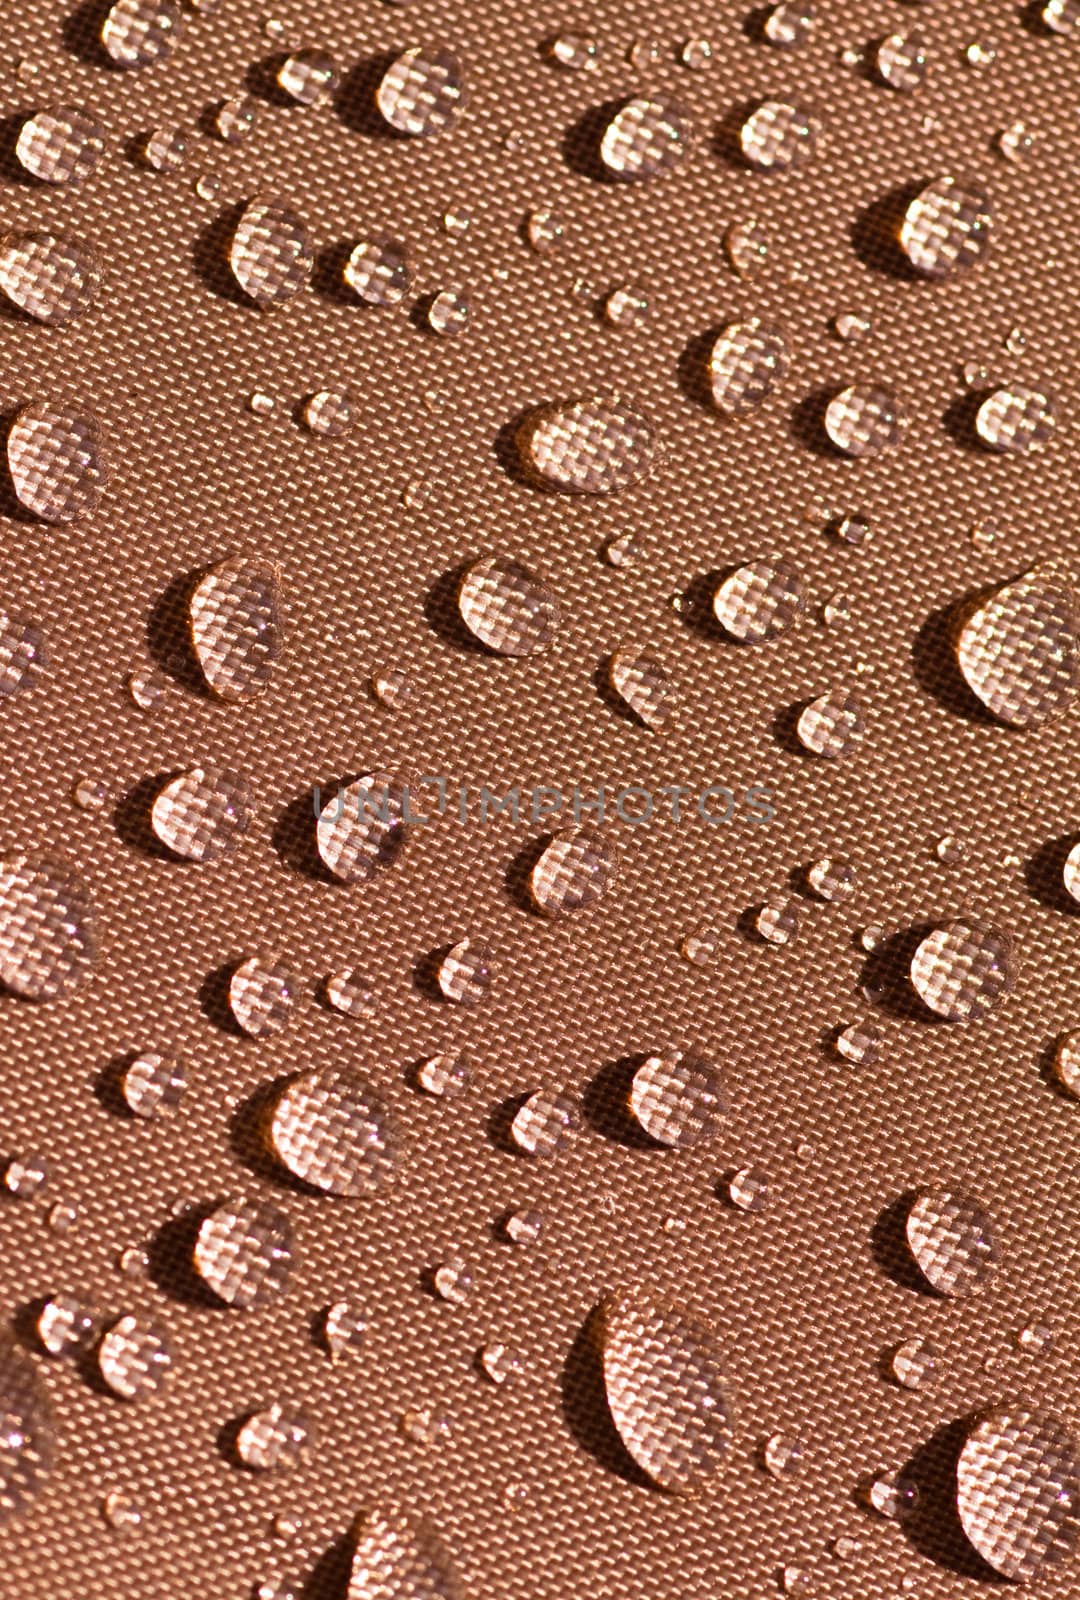 Drops of water on waterproof tent fabric.